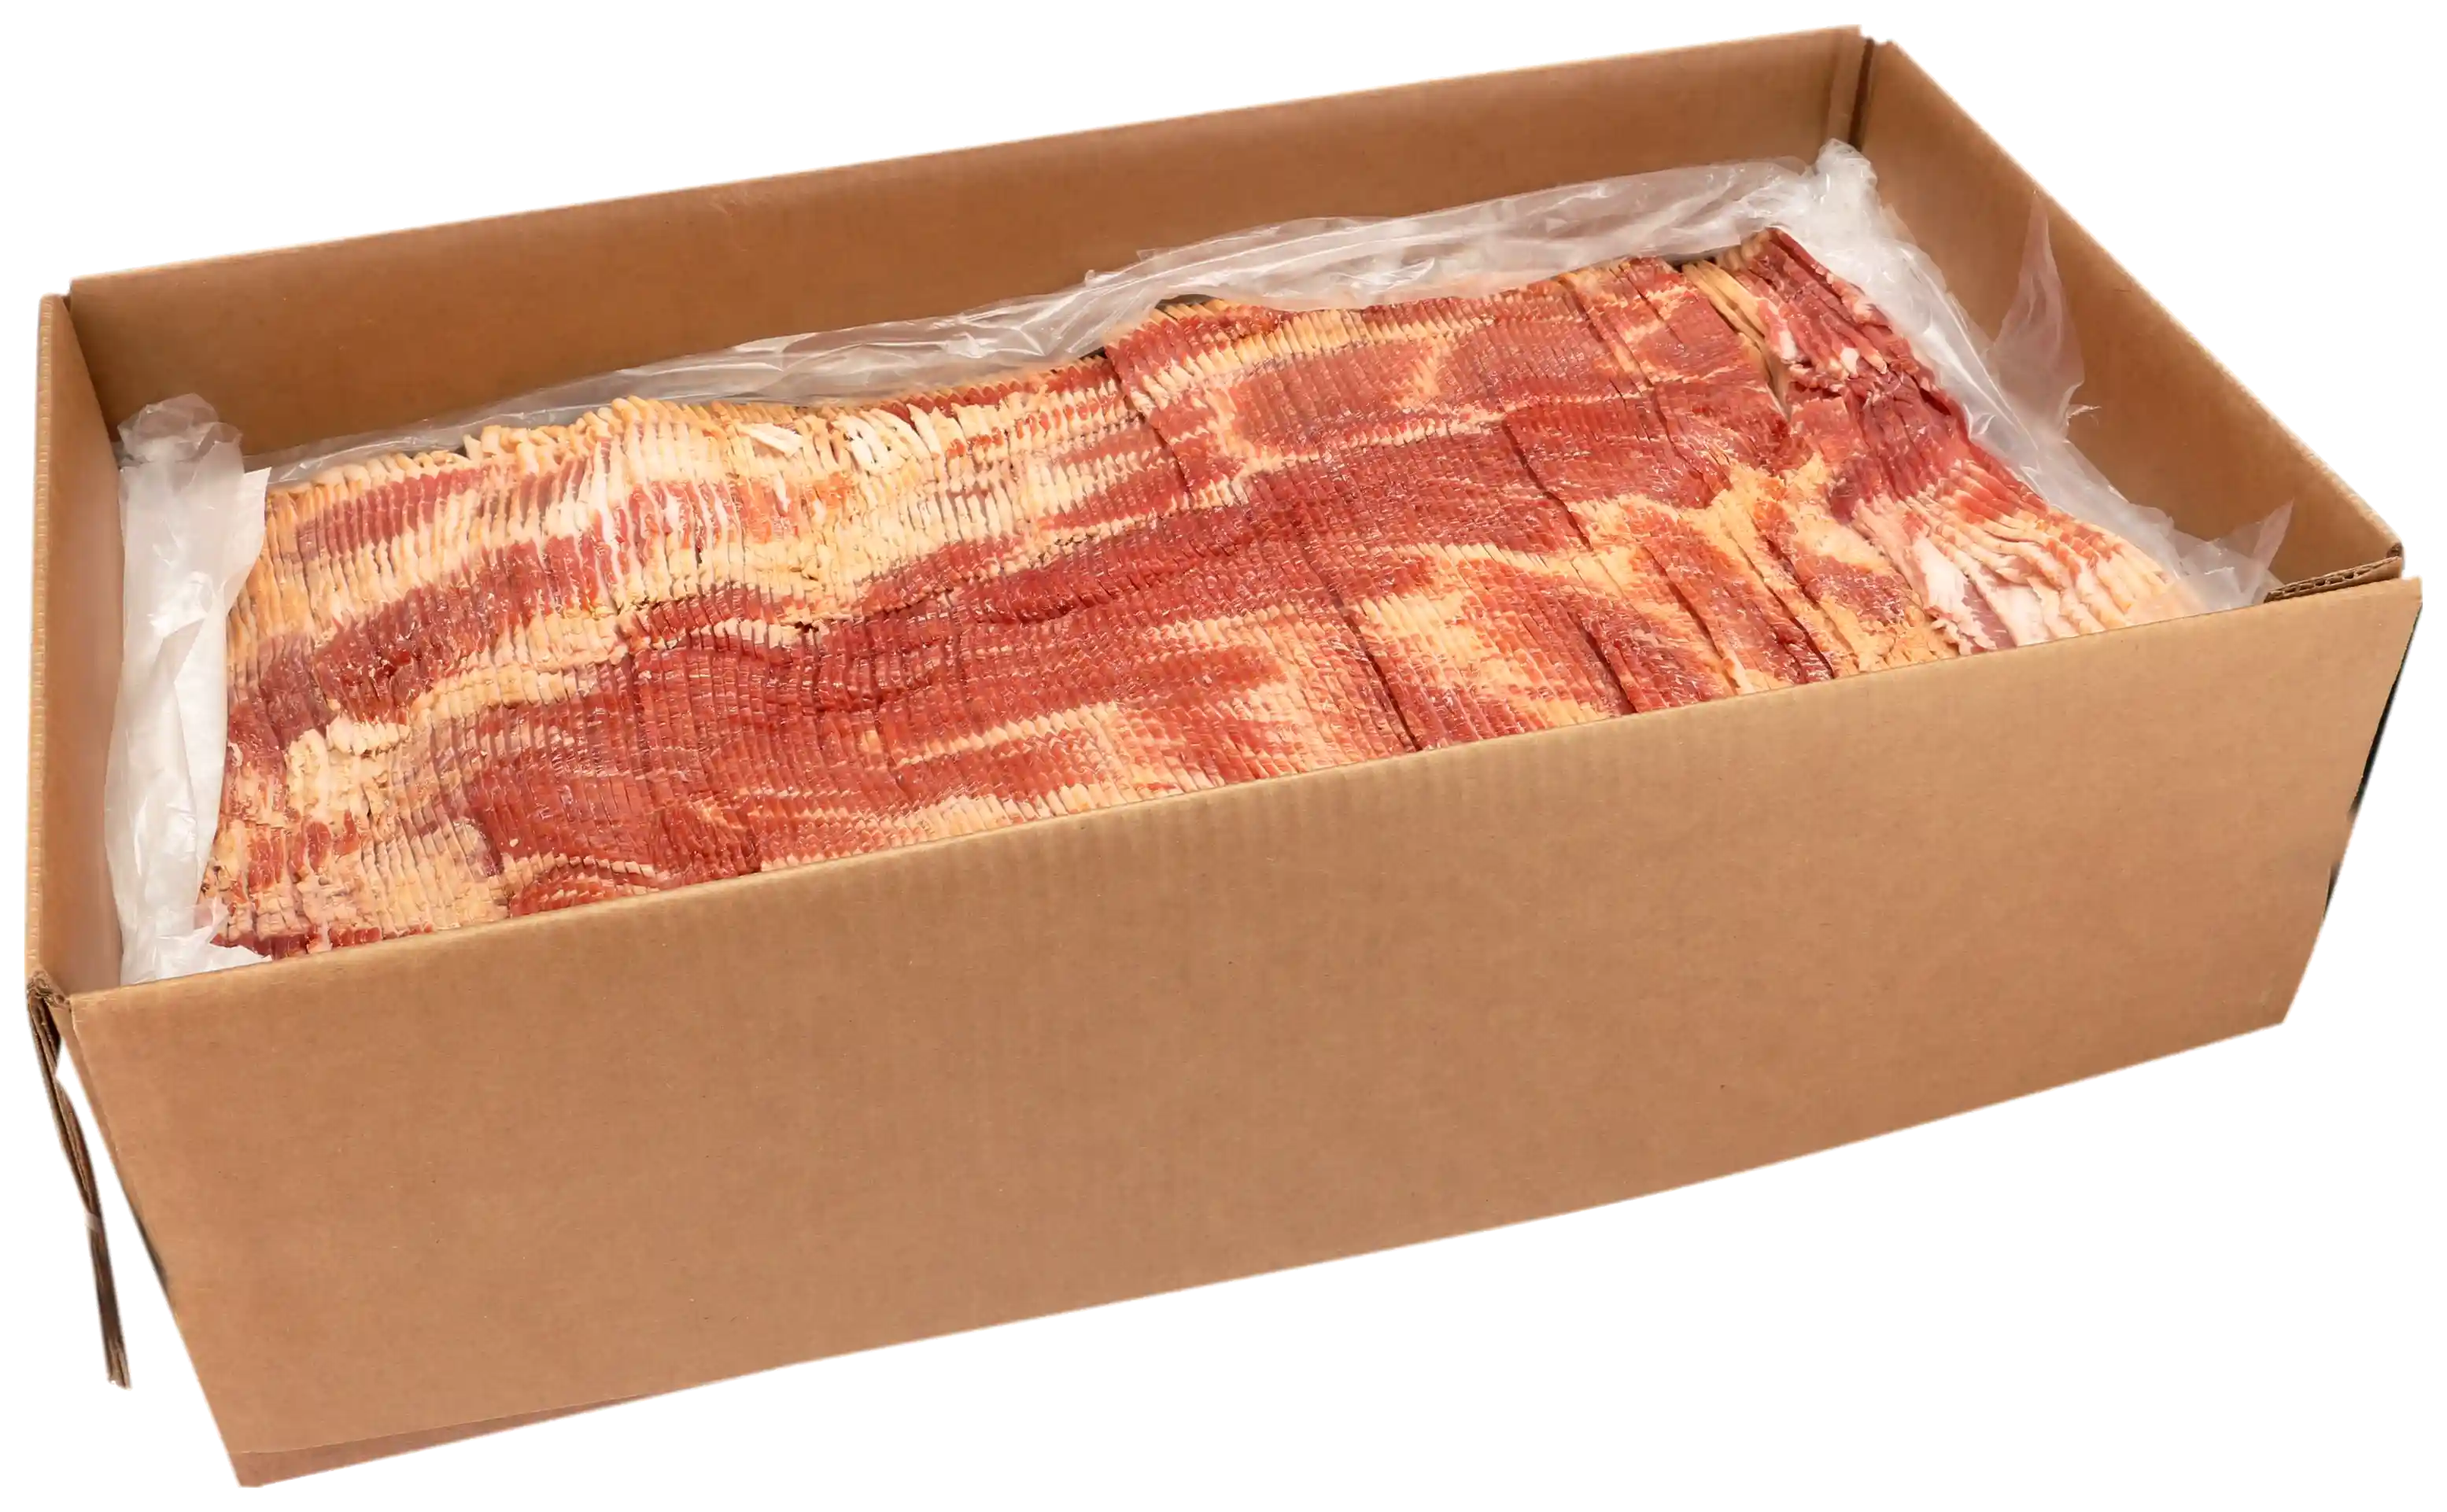 Wright® Brand Naturally Hickory Smoked Regular Sliced Bacon, Bulk, 15 Lbs, 14-18 Slices per Pound, Frozen_image_31